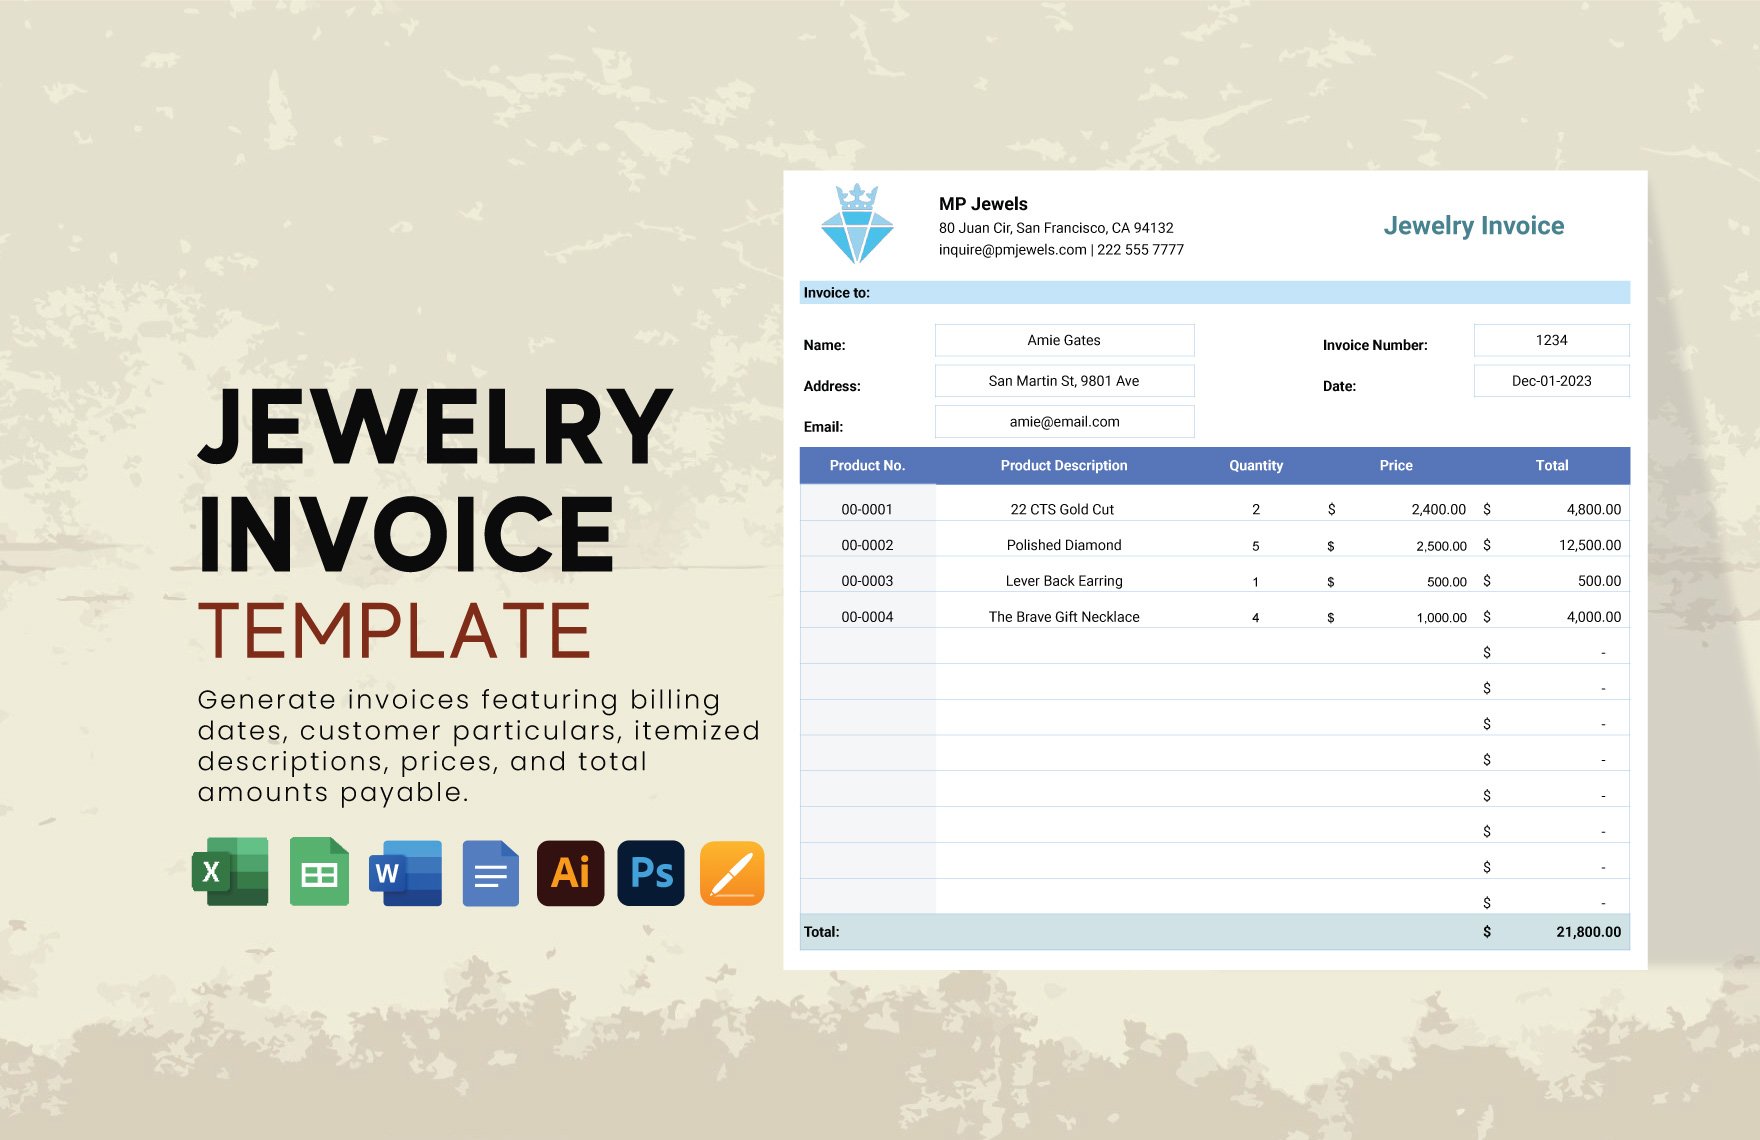 Jewelry Invoice Template in Word, Google Docs, Excel, Google Sheets, Illustrator, PSD, Apple Pages